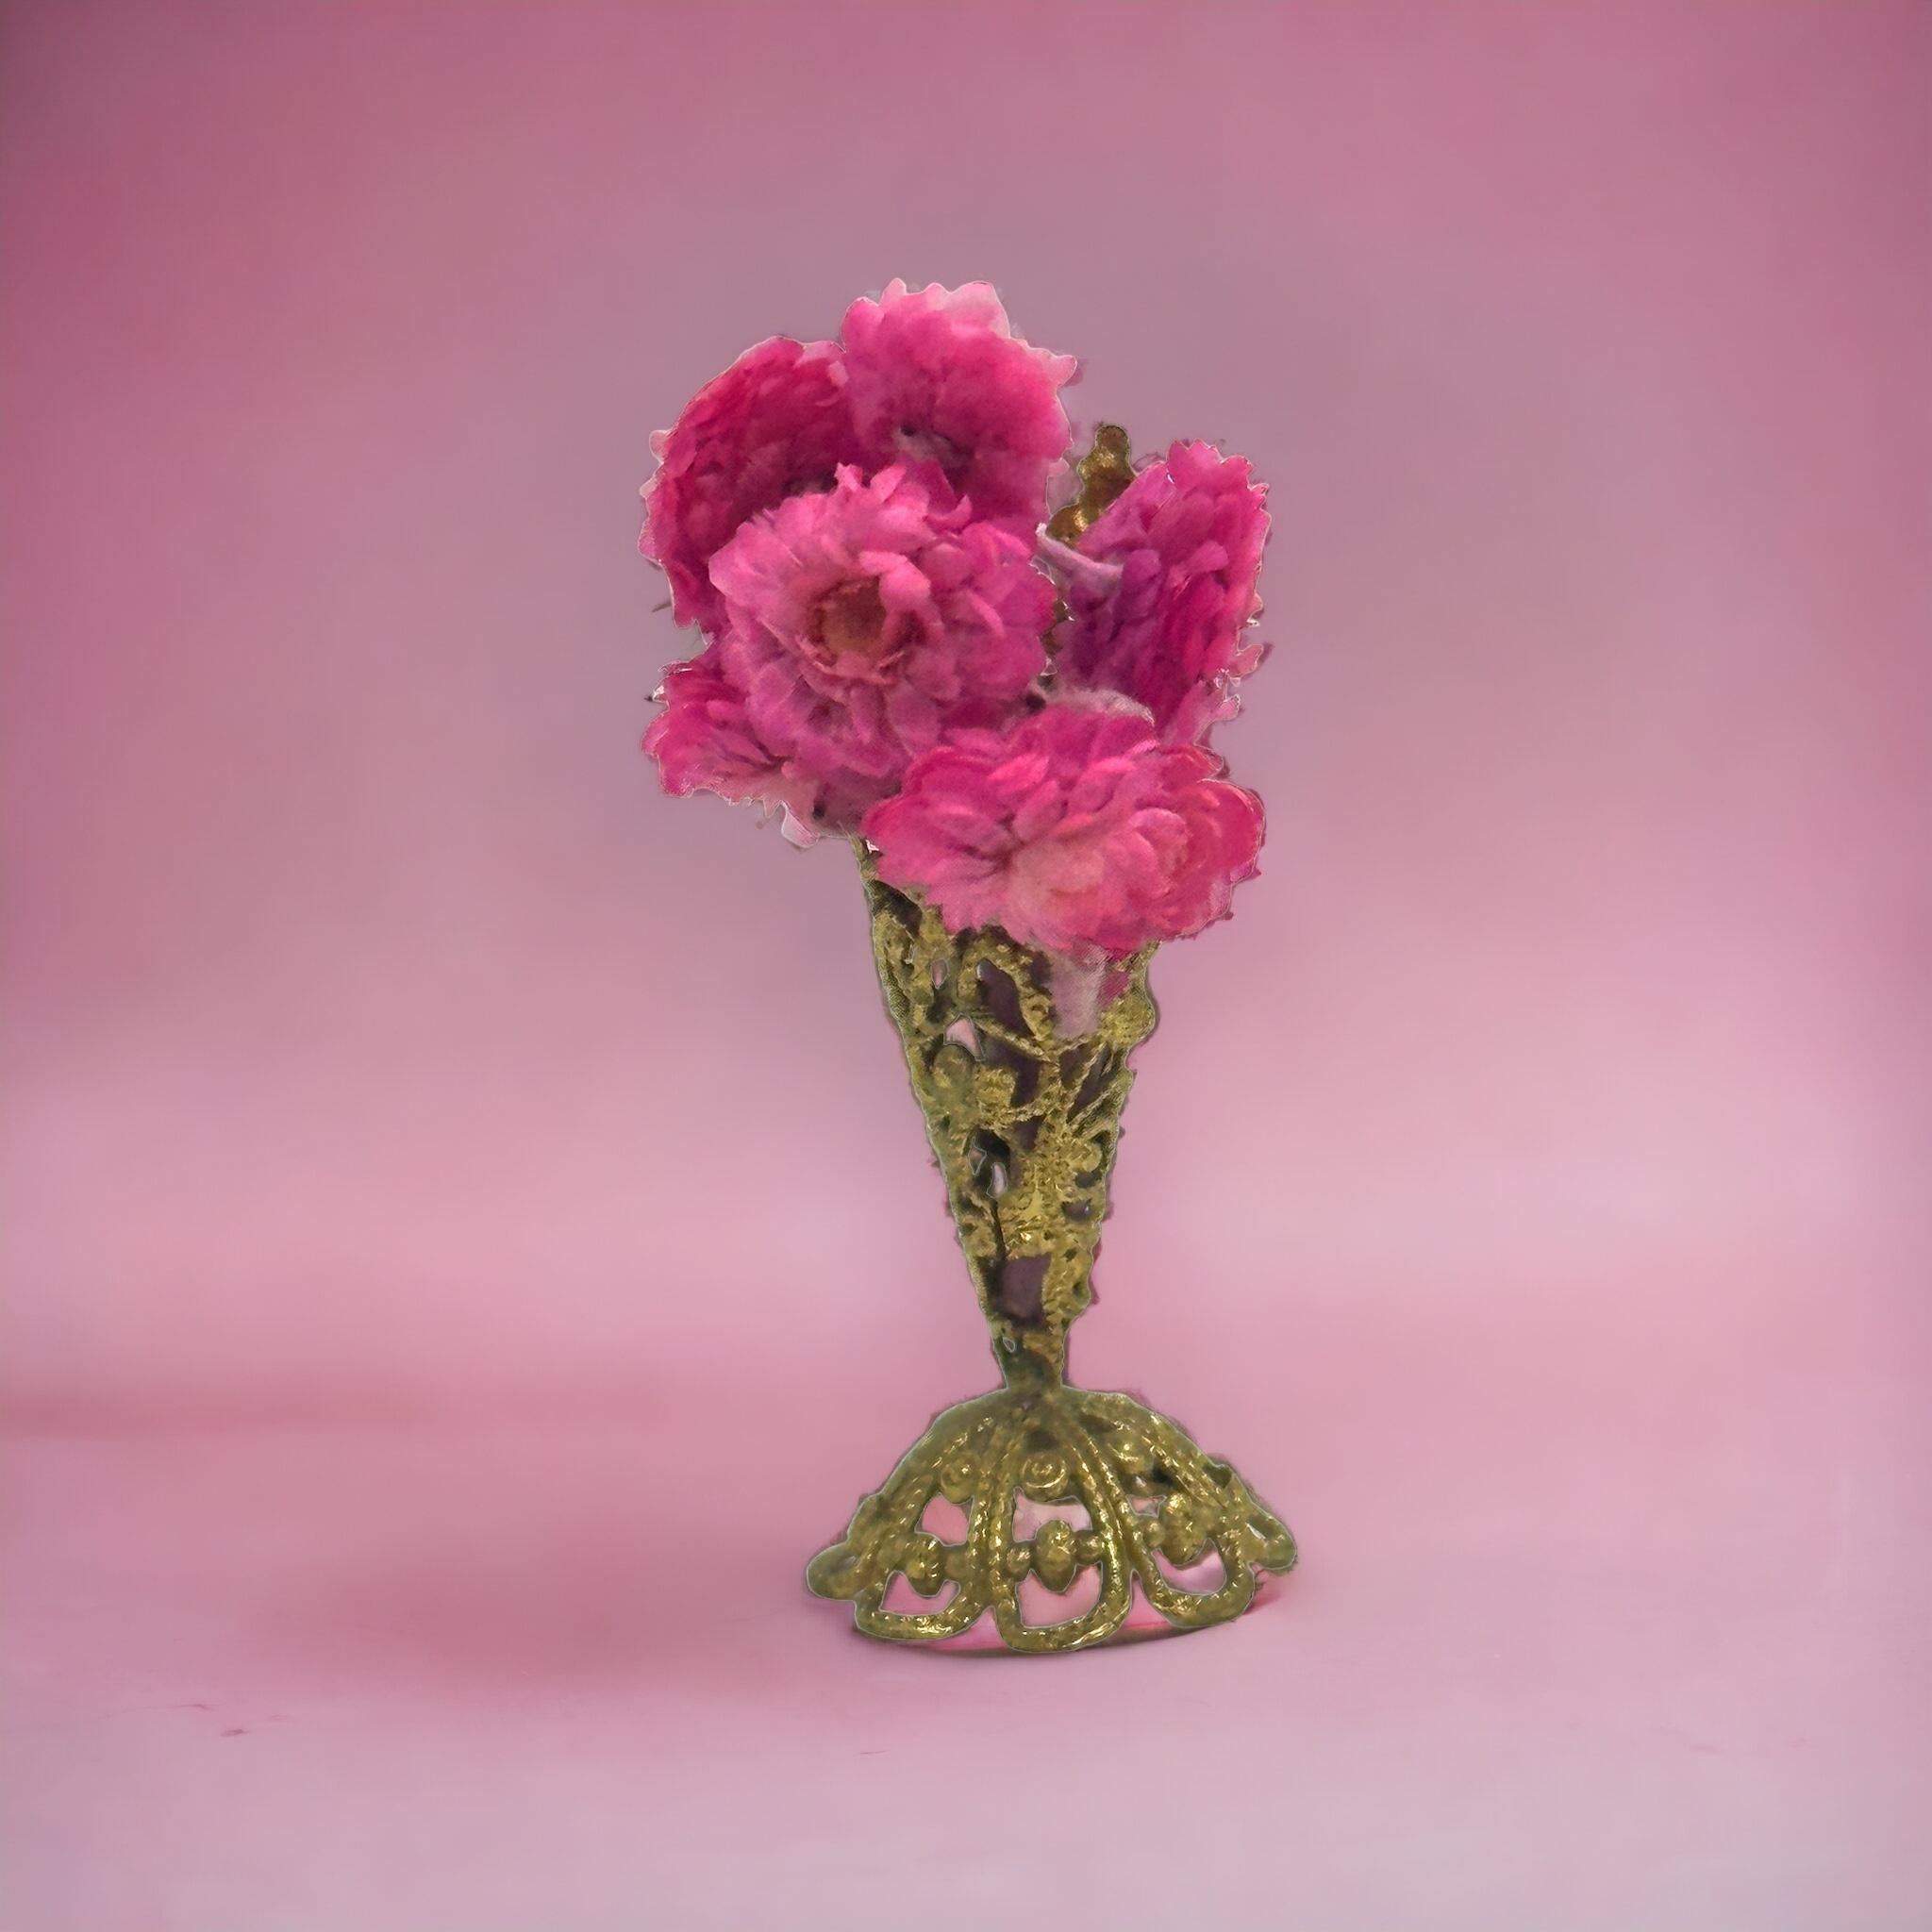 This rare and exquisite miniature antique German Flower Stand Basket is a must-have for Dollhouse and Doll collectors and enthusiasts alike. With its beautiful intricate design, it is suitable for any room and adds a touch of elegance to your